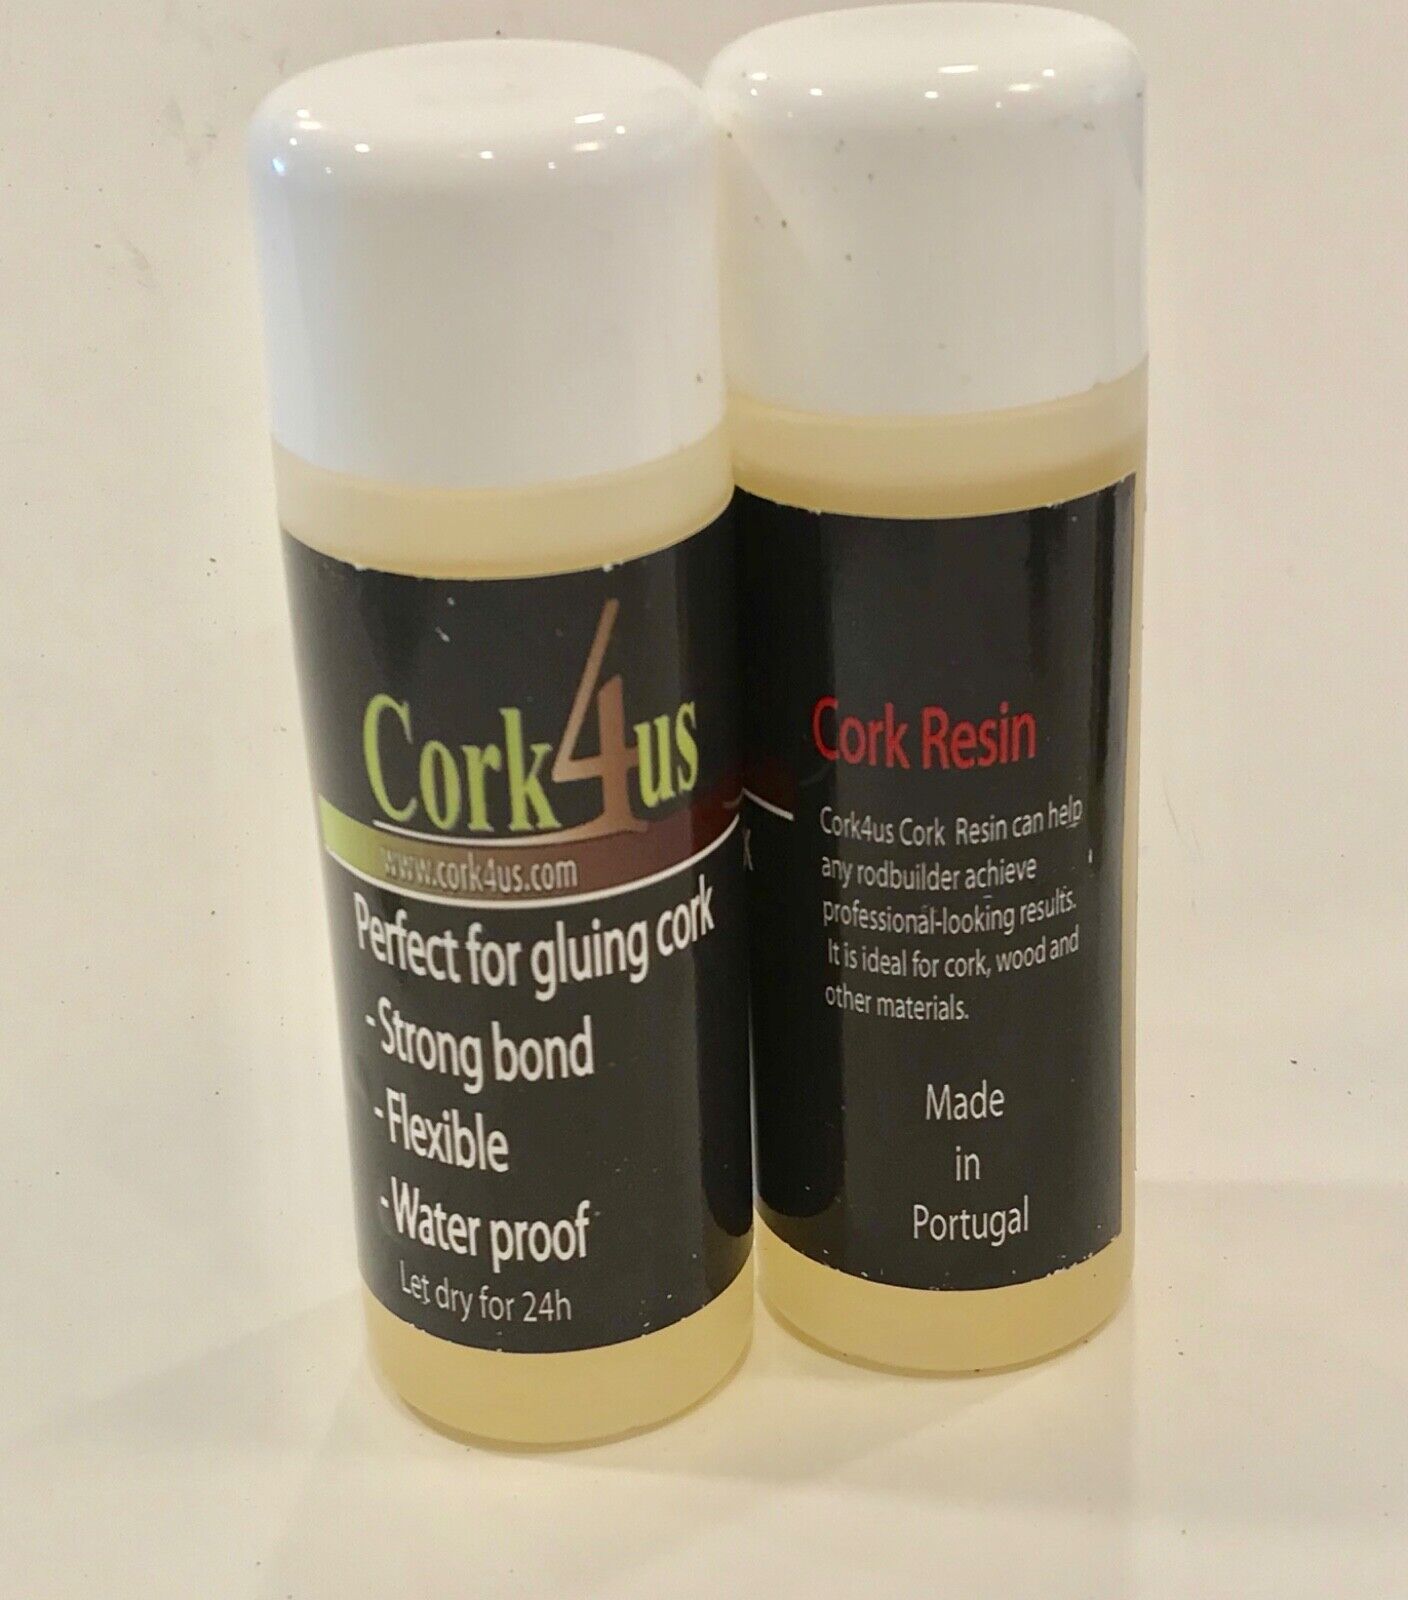 <strong>CORK RESIN</strong>, made in Portugal by Cork4us, with special properties for use in the cork industry